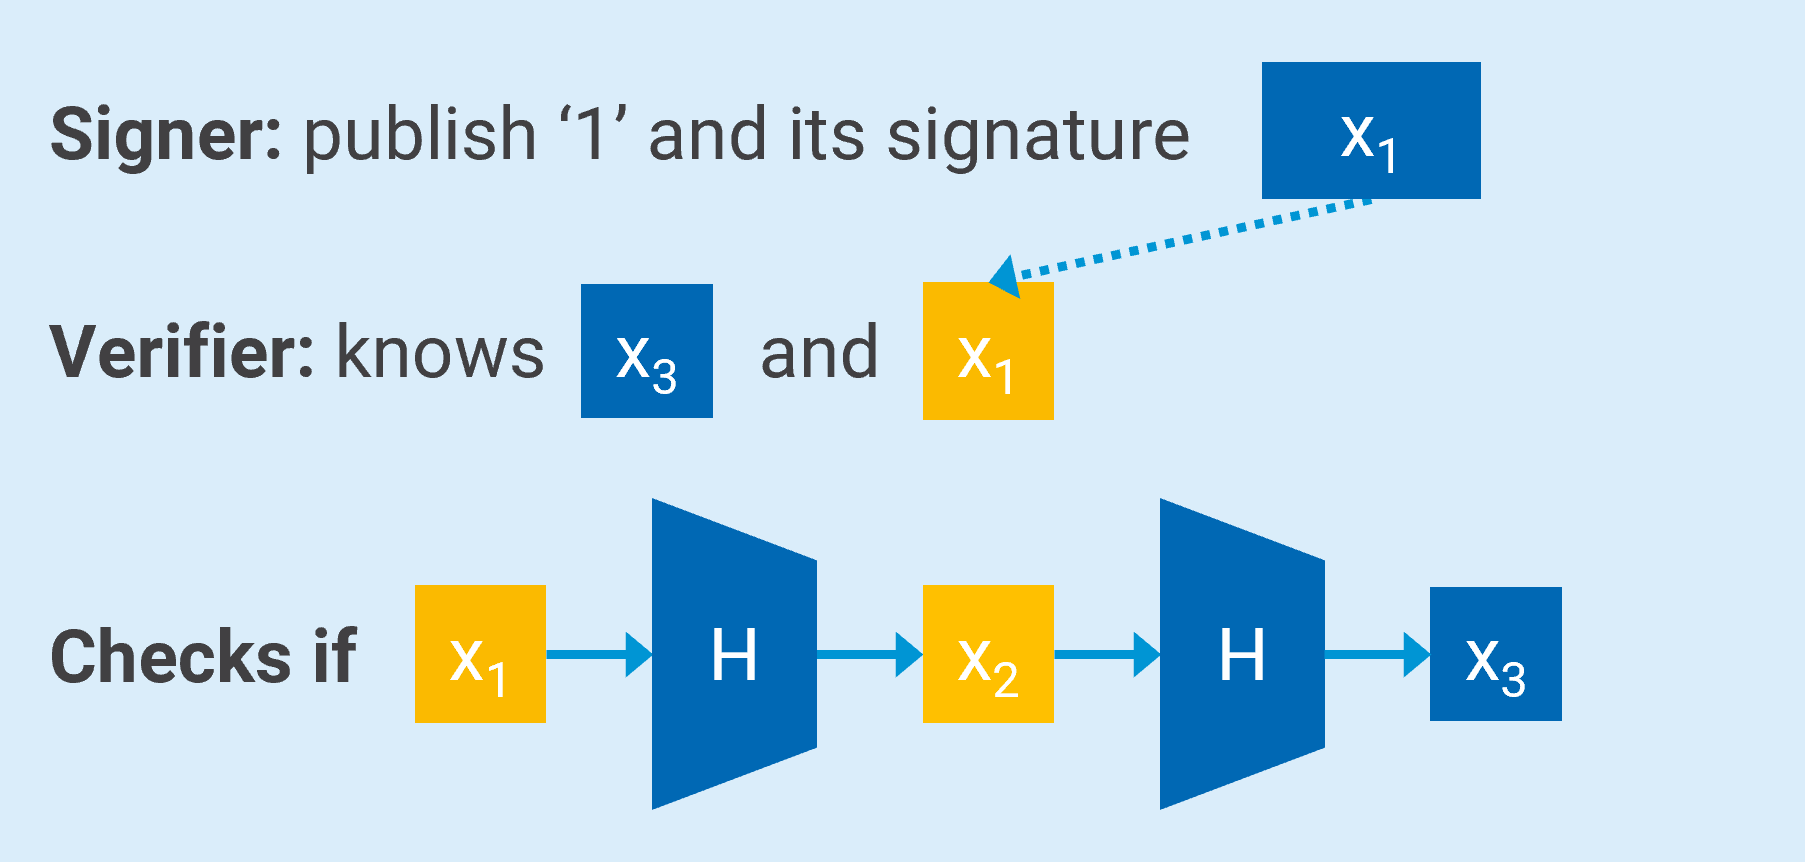 Signing and Verifying message “1” using the hash string